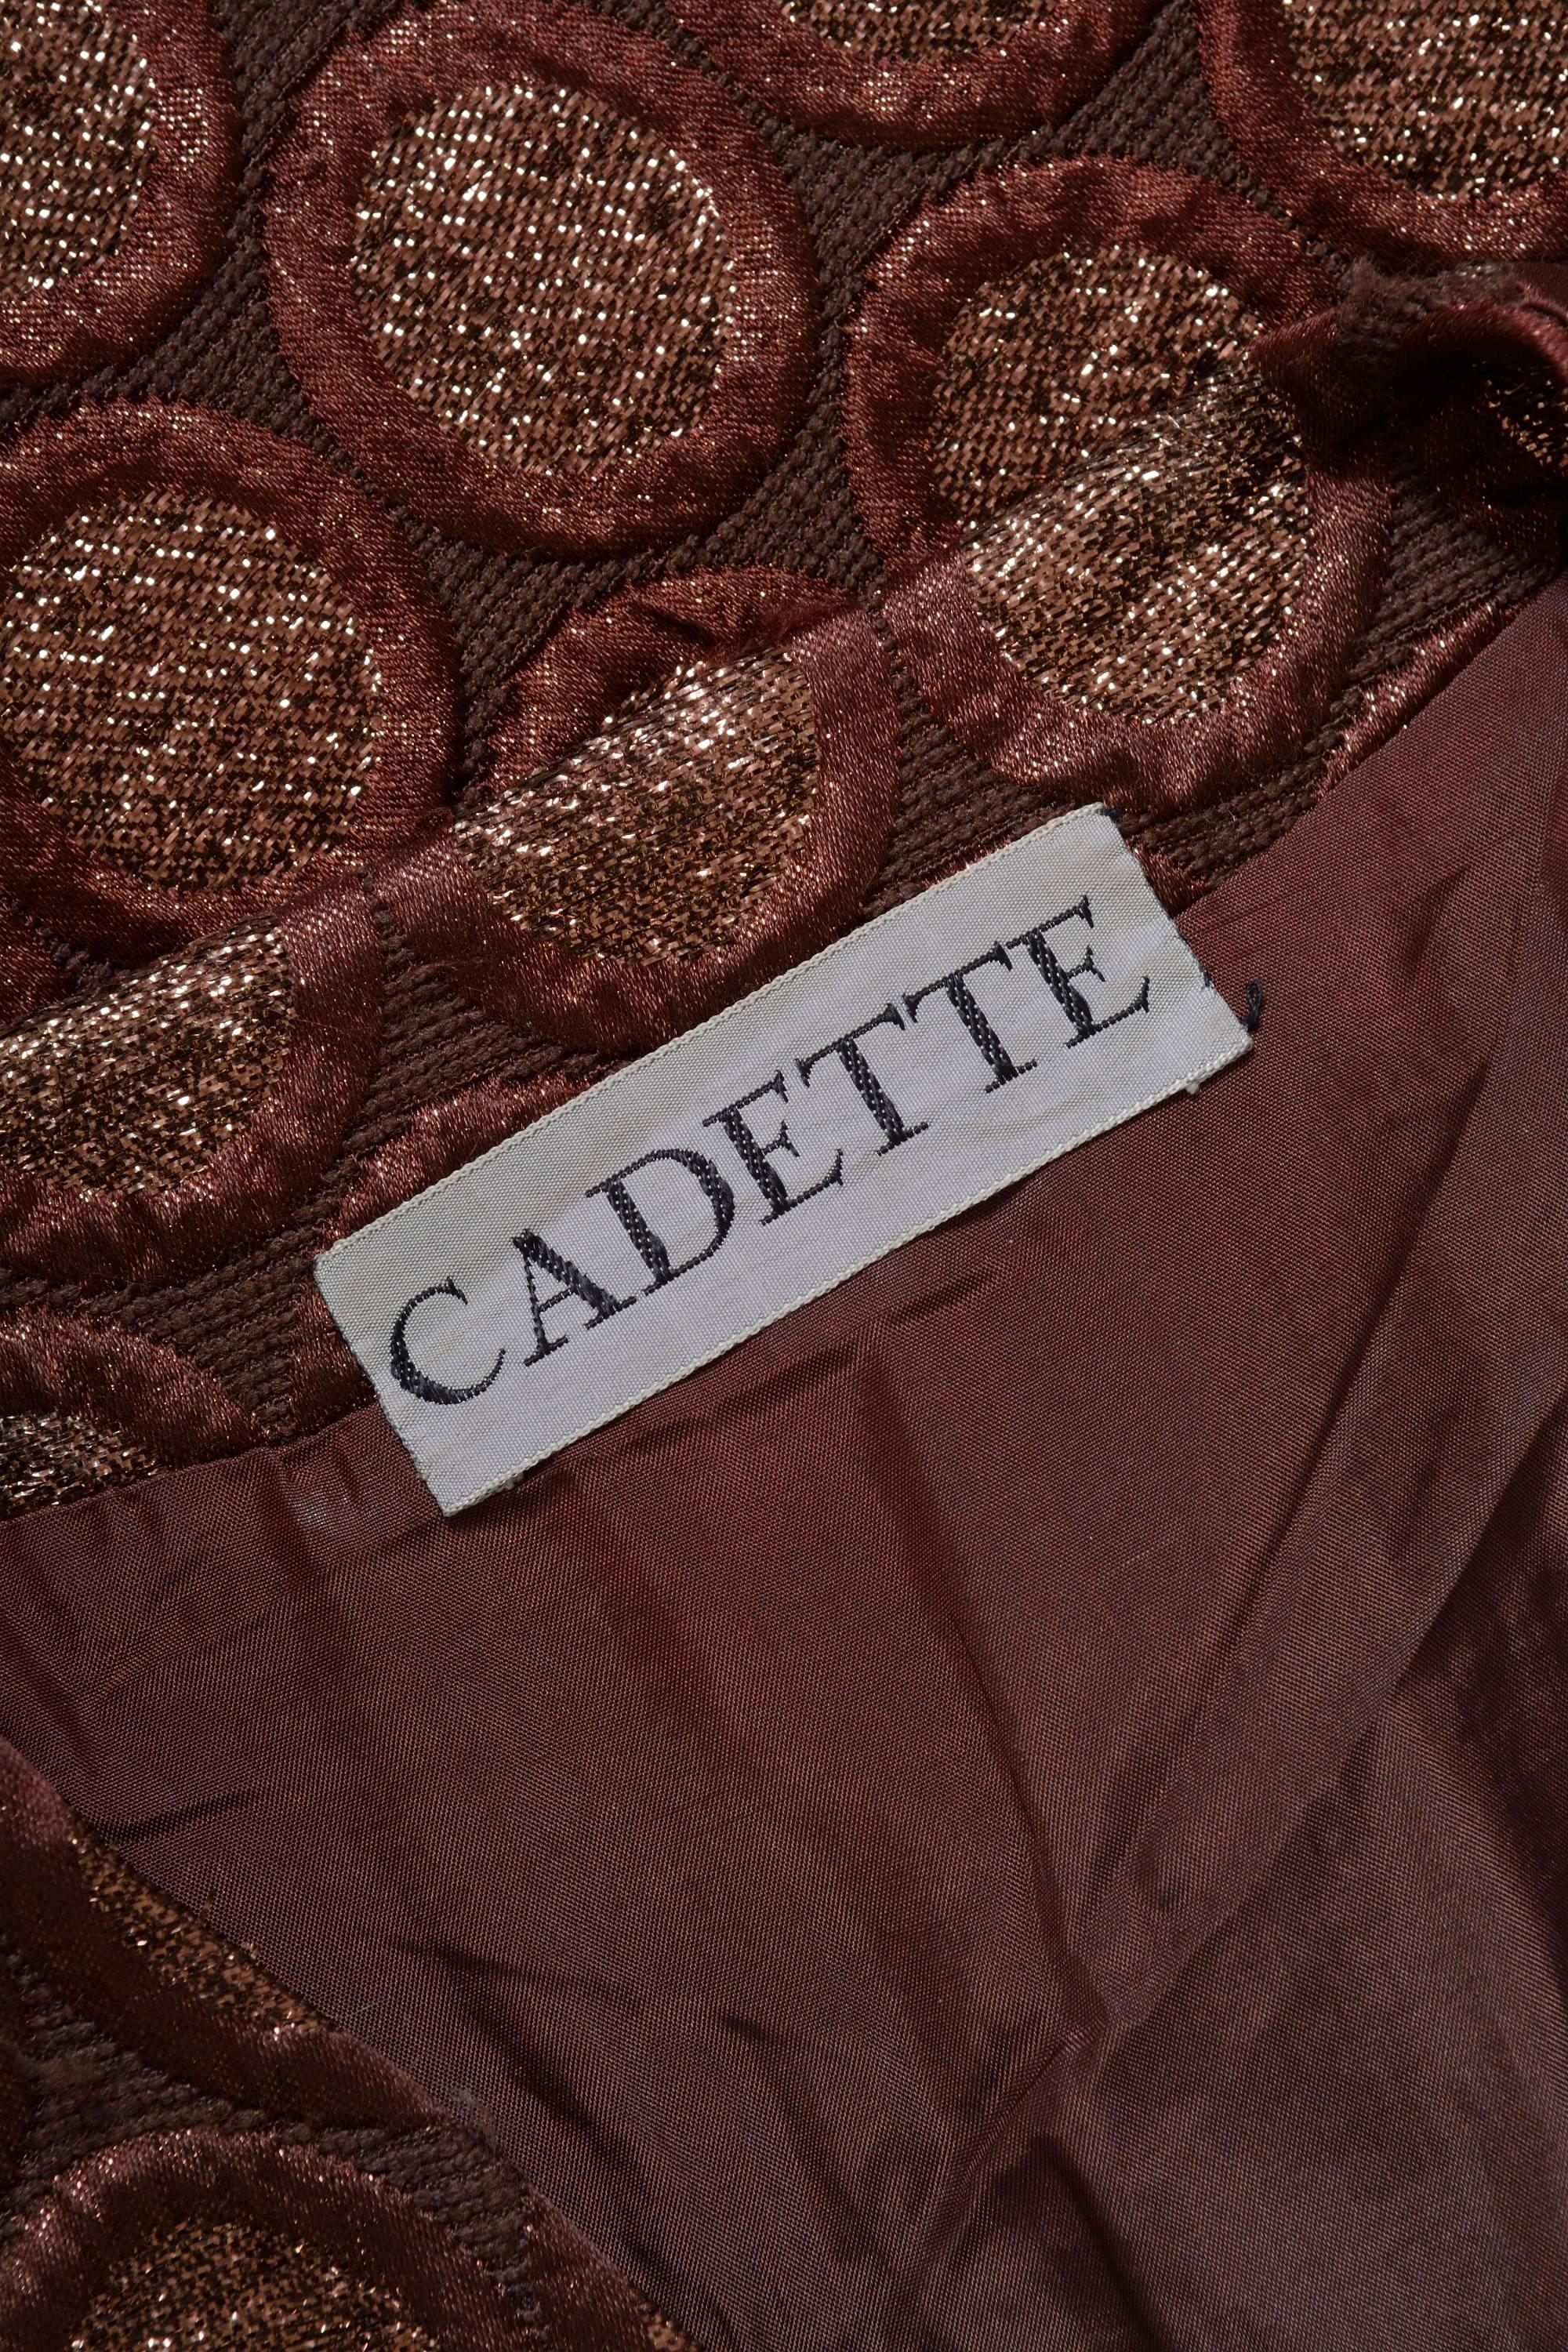 Cadette Brown Lurex Jacquard Mod Overcoat, 1960s  In Excellent Condition For Sale In Milan, Italy